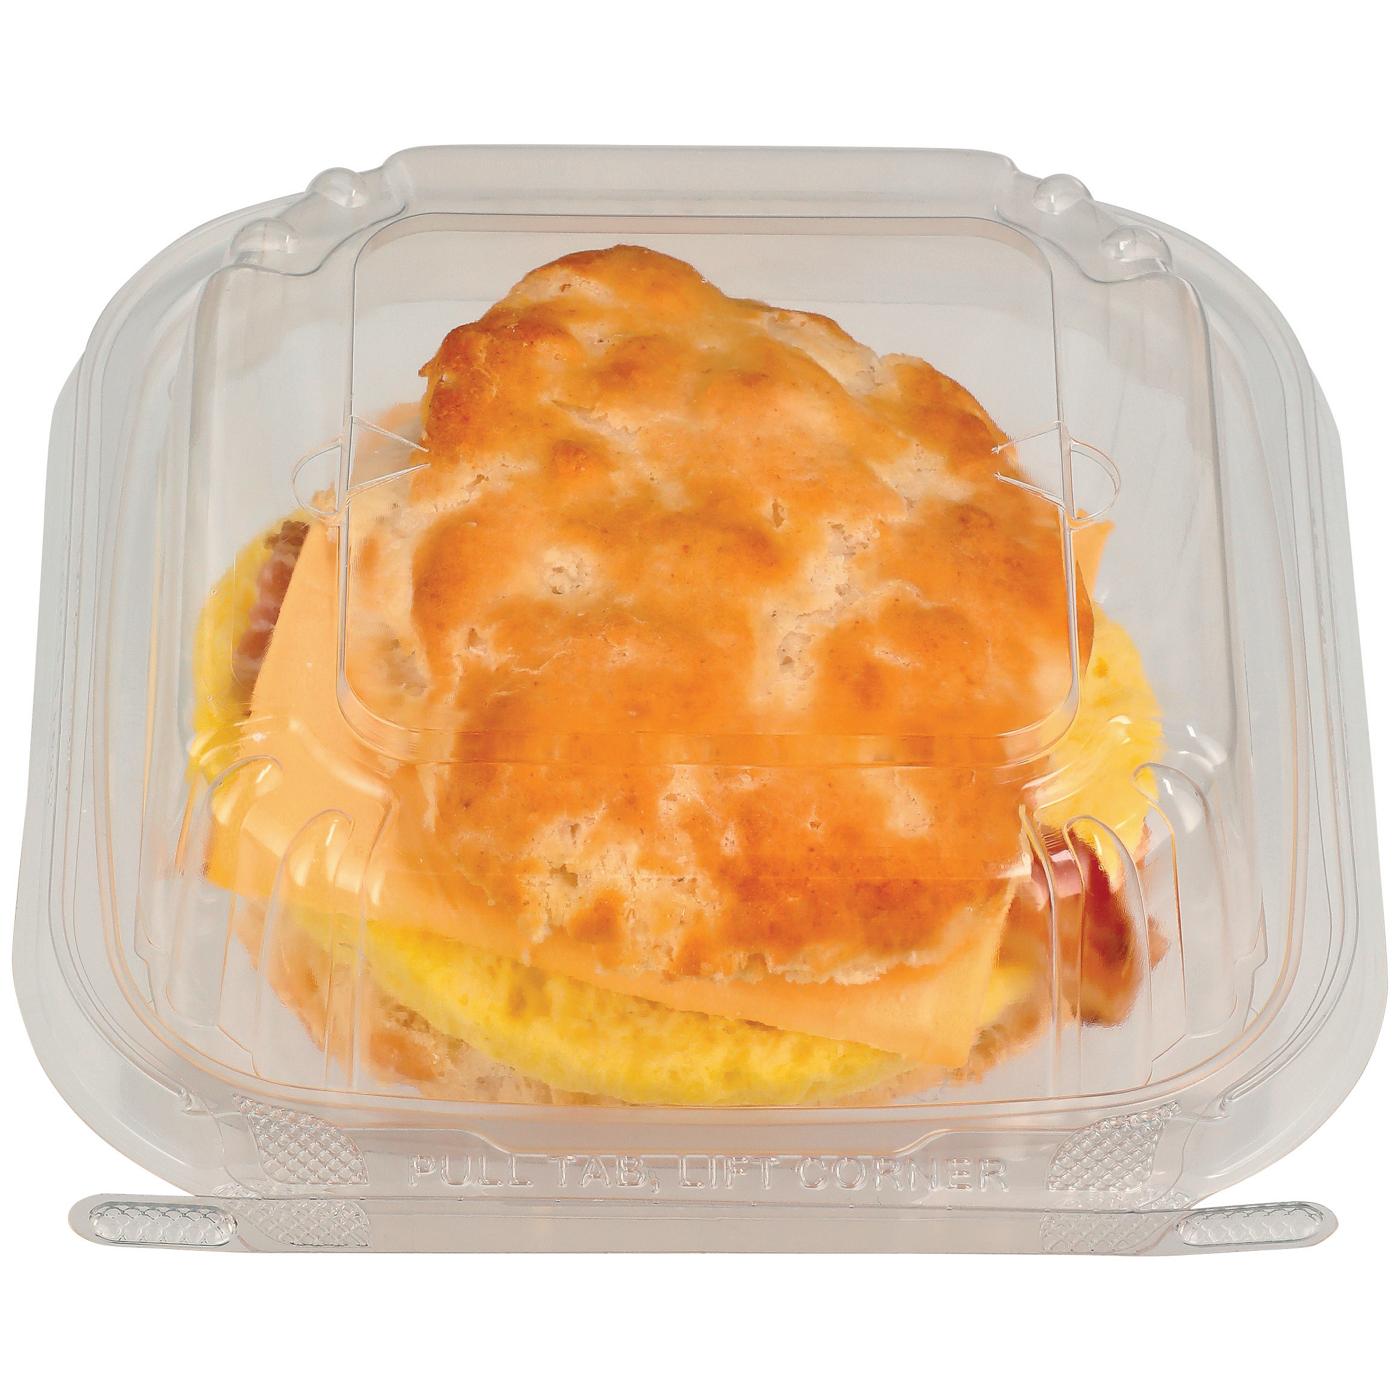 H-E-B Bakery Breakfast Biscuit Sandwich - Bacon, Egg & Cheese; image 1 of 4